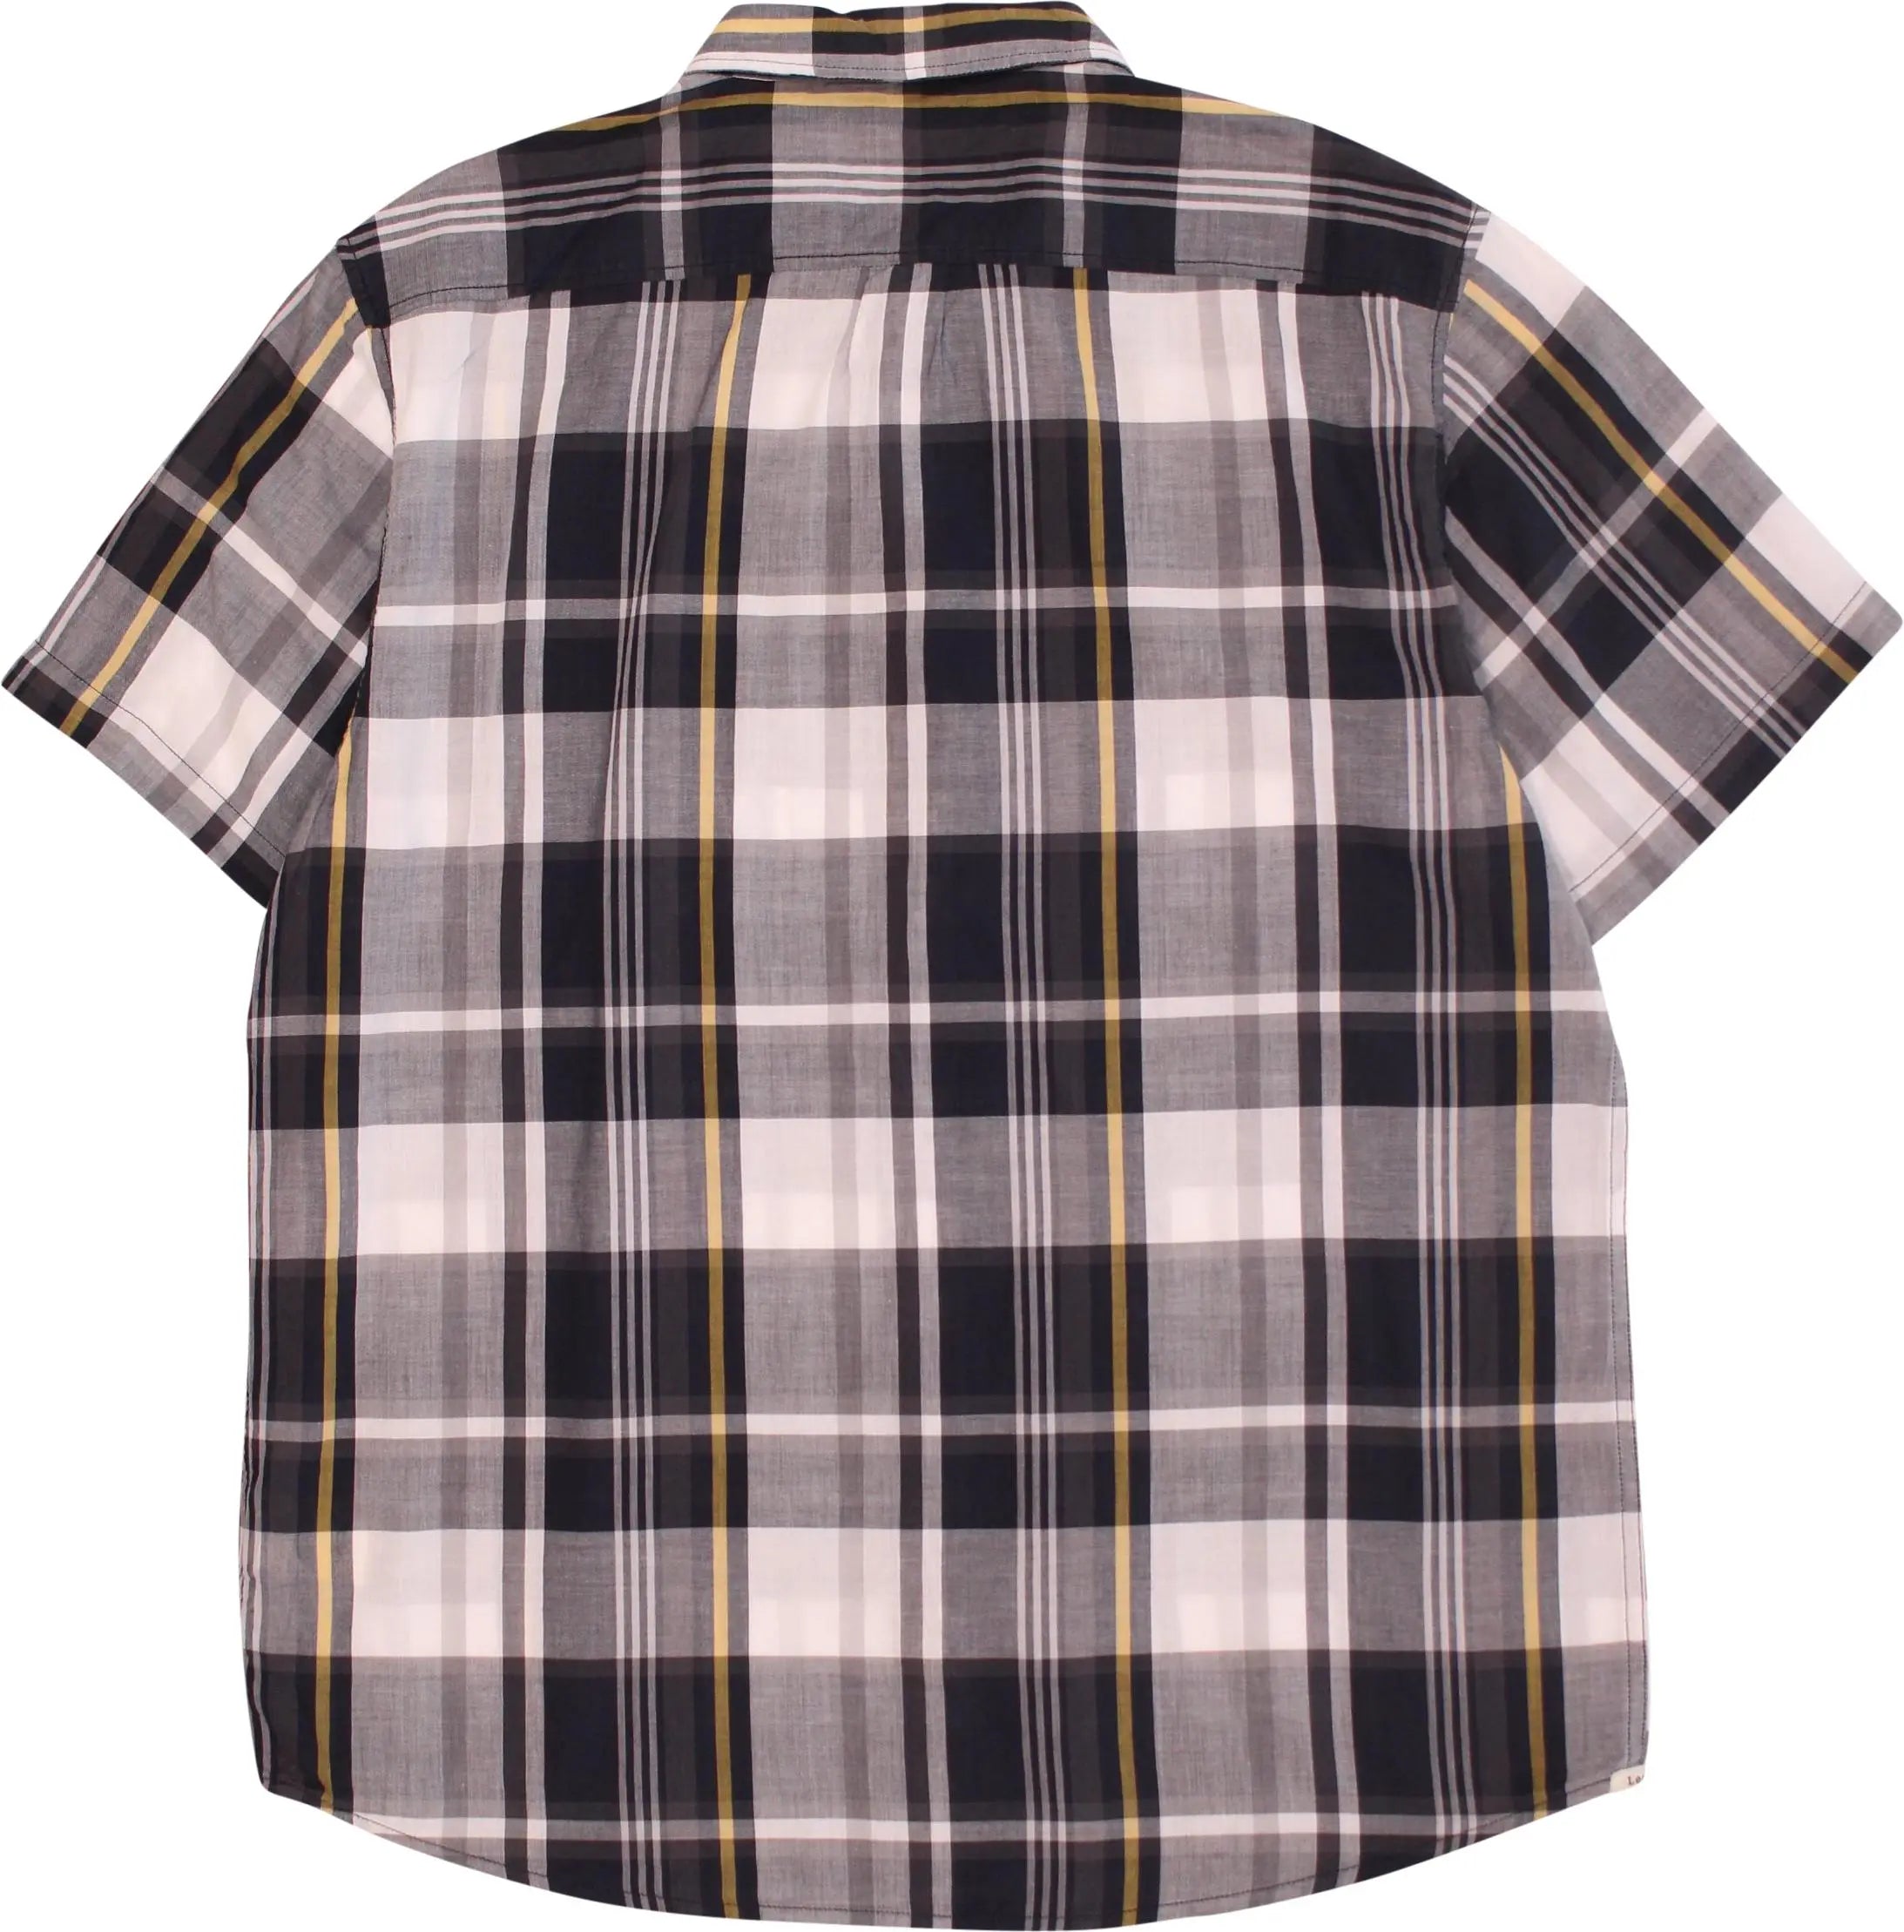 Lee - Checked Short Sleeve Shirt by Lee- ThriftTale.com - Vintage and second handclothing